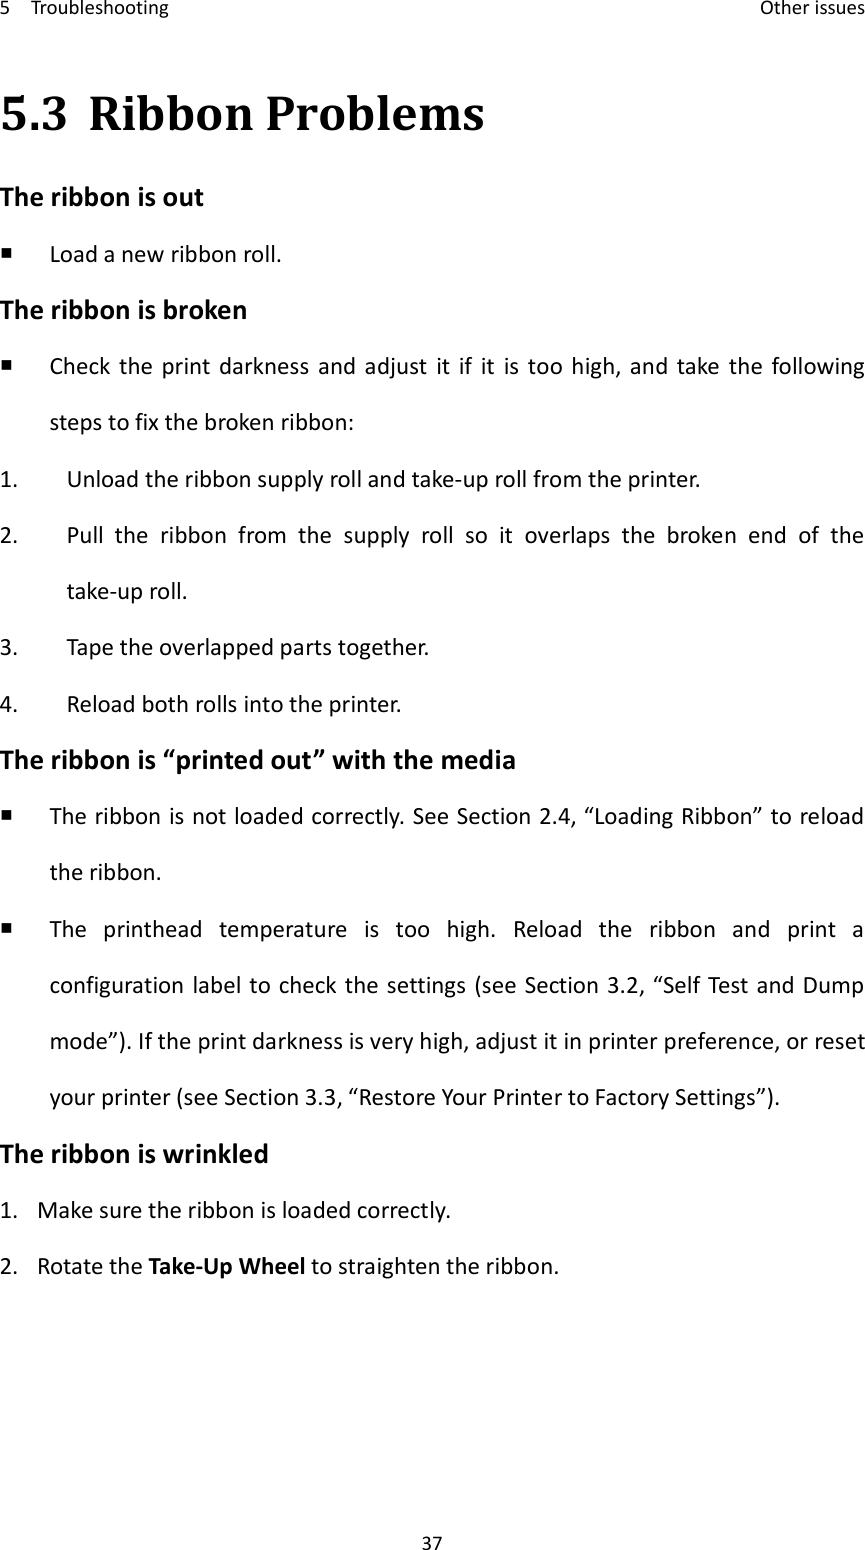 5    Troubleshooting    Other issues 37 5.3 Ribbon Problems The ribbon is out  Load a new ribbon roll. The ribbon is broken  Check  the  print  darkness  and adjust  it  if  it  is  too  high, and take  the  following steps to fix the broken ribbon: 1. Unload the ribbon supply roll and take-up roll from the printer. 2. Pull  the  ribbon  from  the  supply  roll  so  it  overlaps  the  broken  end  of  the take-up roll. 3. Tape the overlapped parts together. 4. Reload both rolls into the printer. The ribbon is “printed out” with the media  The ribbon is not loaded correctly. See Section 2.4, “Loading Ribbon” to reload the ribbon.  The  printhead  temperature  is  too  high.  Reload  the  ribbon  and  print  a configuration label to check the settings (see Section 3.2, “Self Test and Dump mode”). If the print darkness is very high, adjust it in printer preference, or reset your printer (see Section 3.3, “Restore Your Printer to Factory Settings”). The ribbon is wrinkled 1. Make sure the ribbon is loaded correctly. 2. Rotate the Take-Up Wheel to straighten the ribbon.   